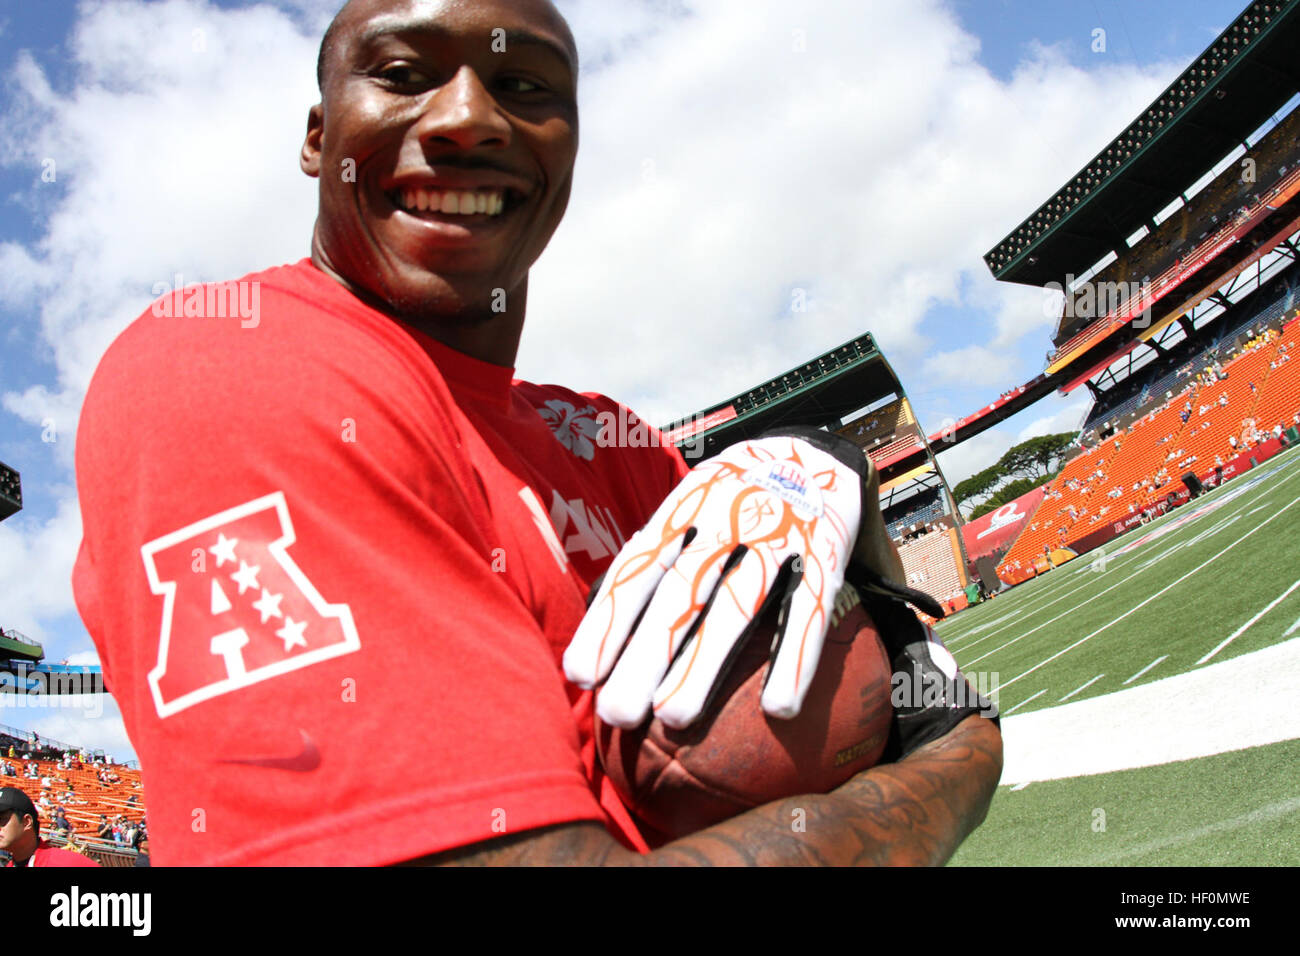 Miami Dolphins wide receiver Brandon Marshall smiles after making a reception during pregame warm up at the Aloha Stadium during National Football League's 2012 Pro Bowl game in Honolulu, Hawaii, Jan. 29, 2012. Brandon Marshall smile Stock Photo